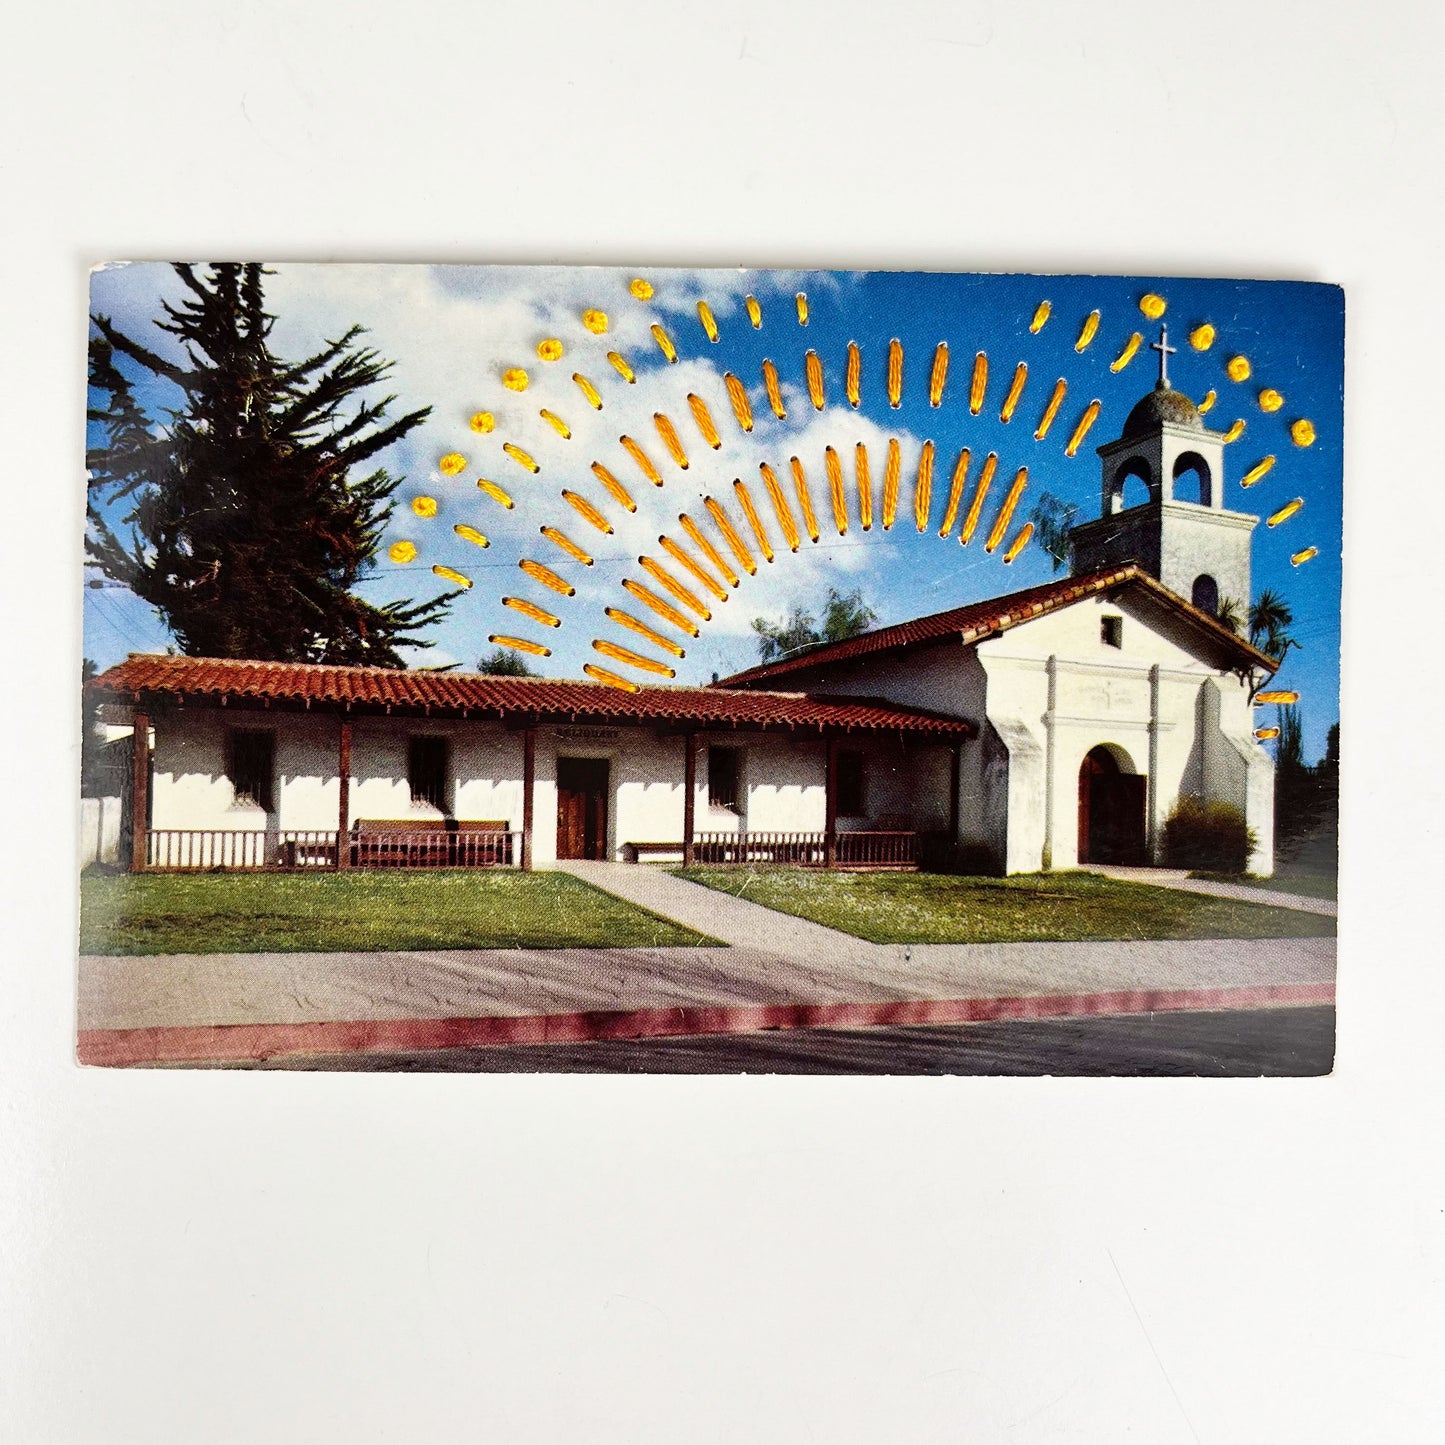 an old postcard of a mission building in Santa Cruz, with hand embroidered dashed lines and french knots resembling sun beams in oranges and yellows, stitched in the background on the sky only, the postcard is sitting on a white background